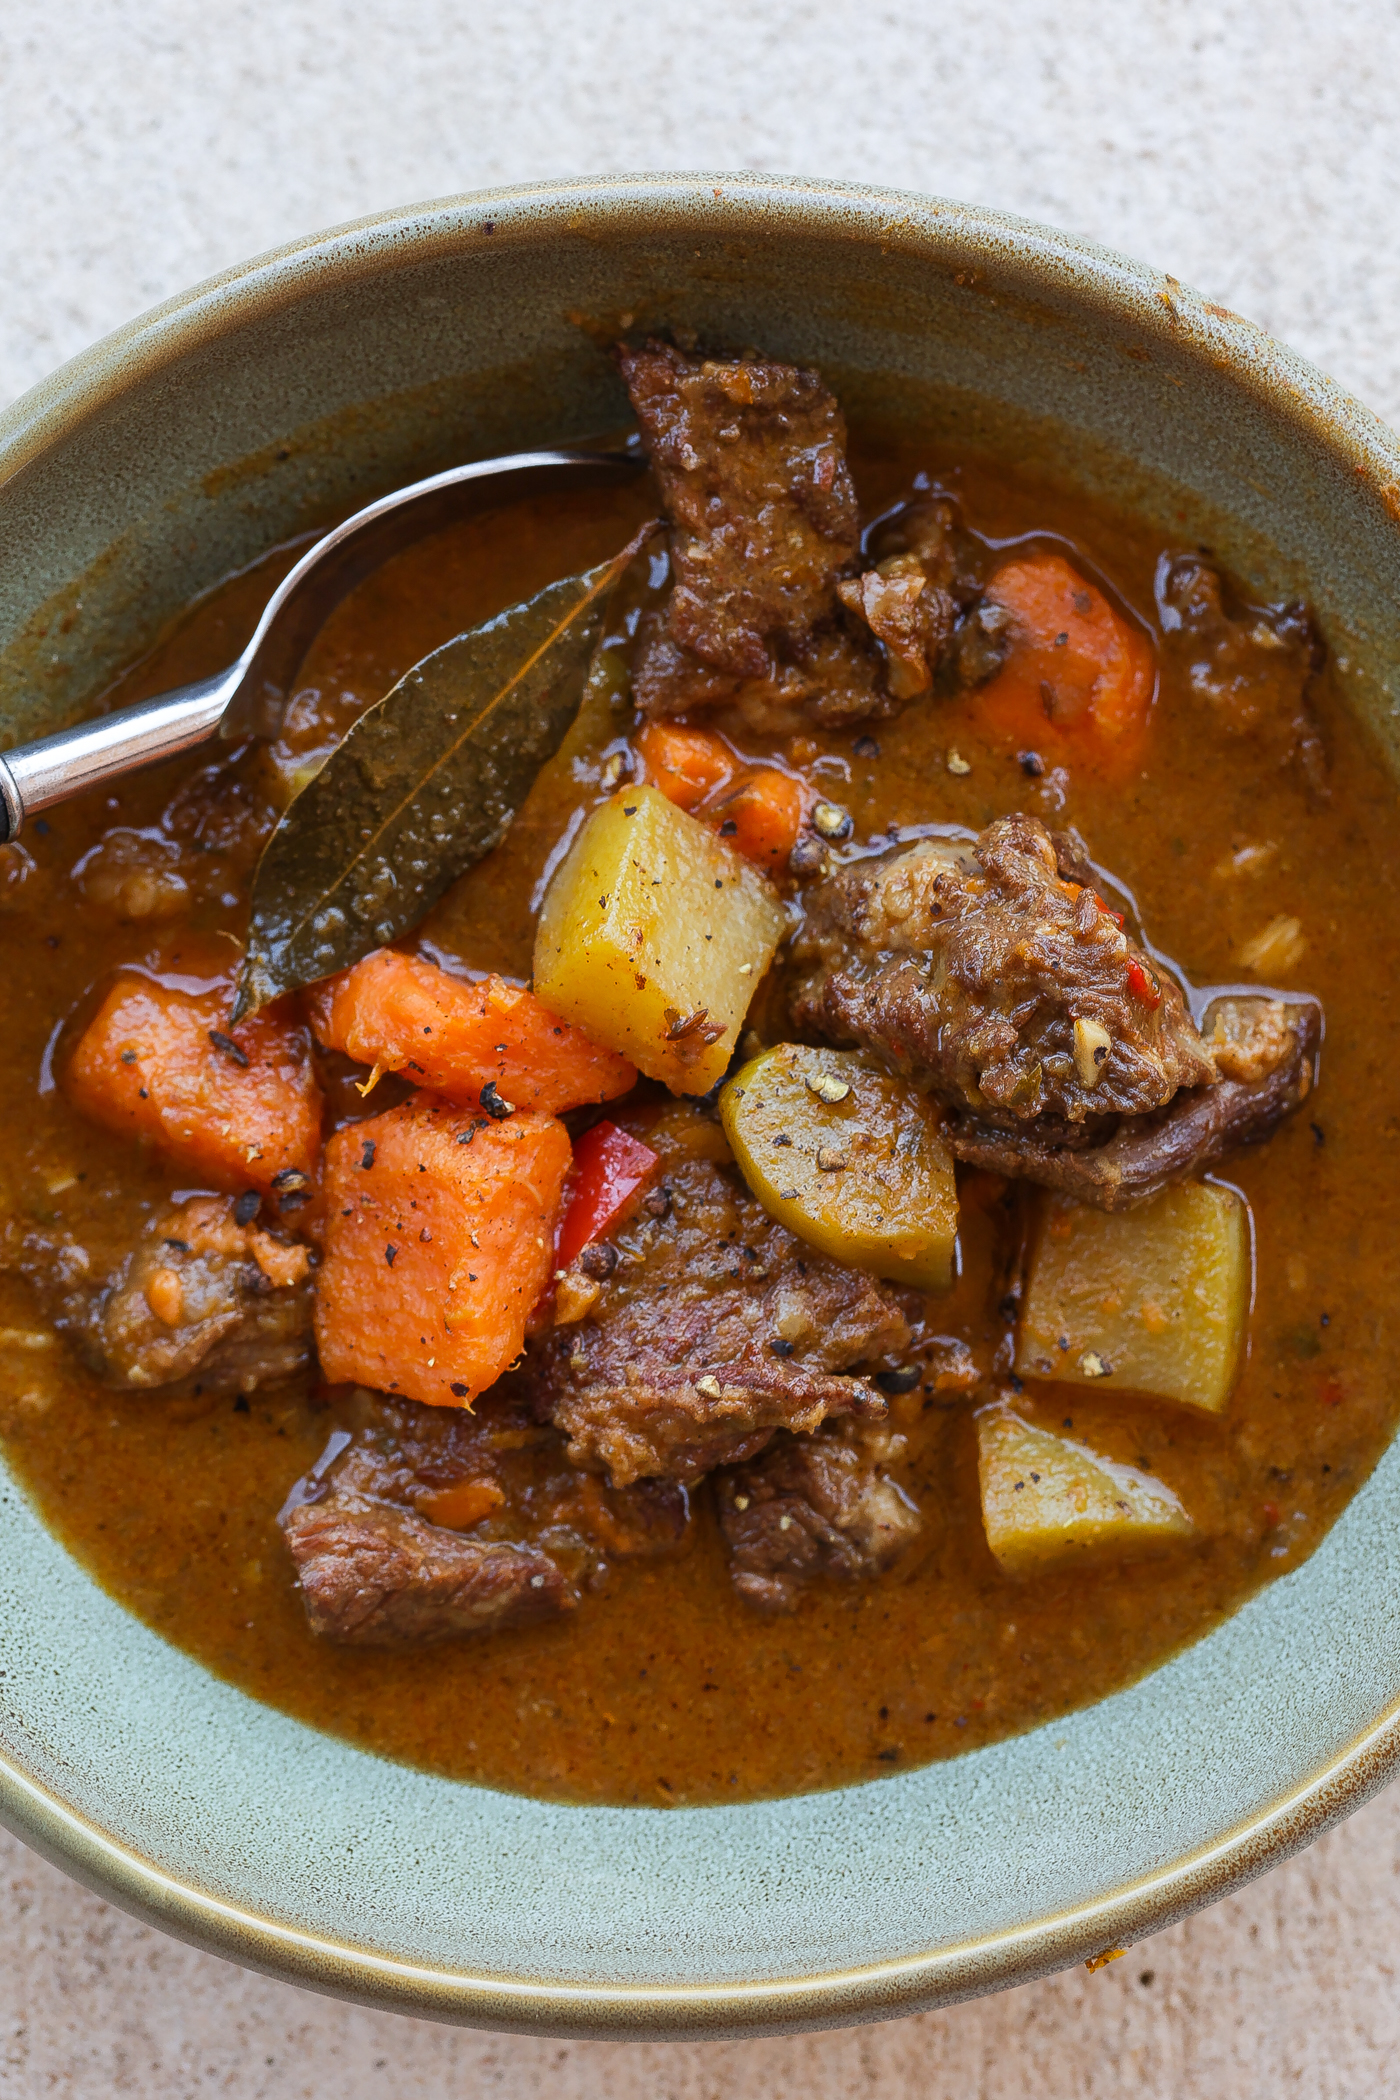 Hungarian goulash (beef stew) in a blue-green bowl